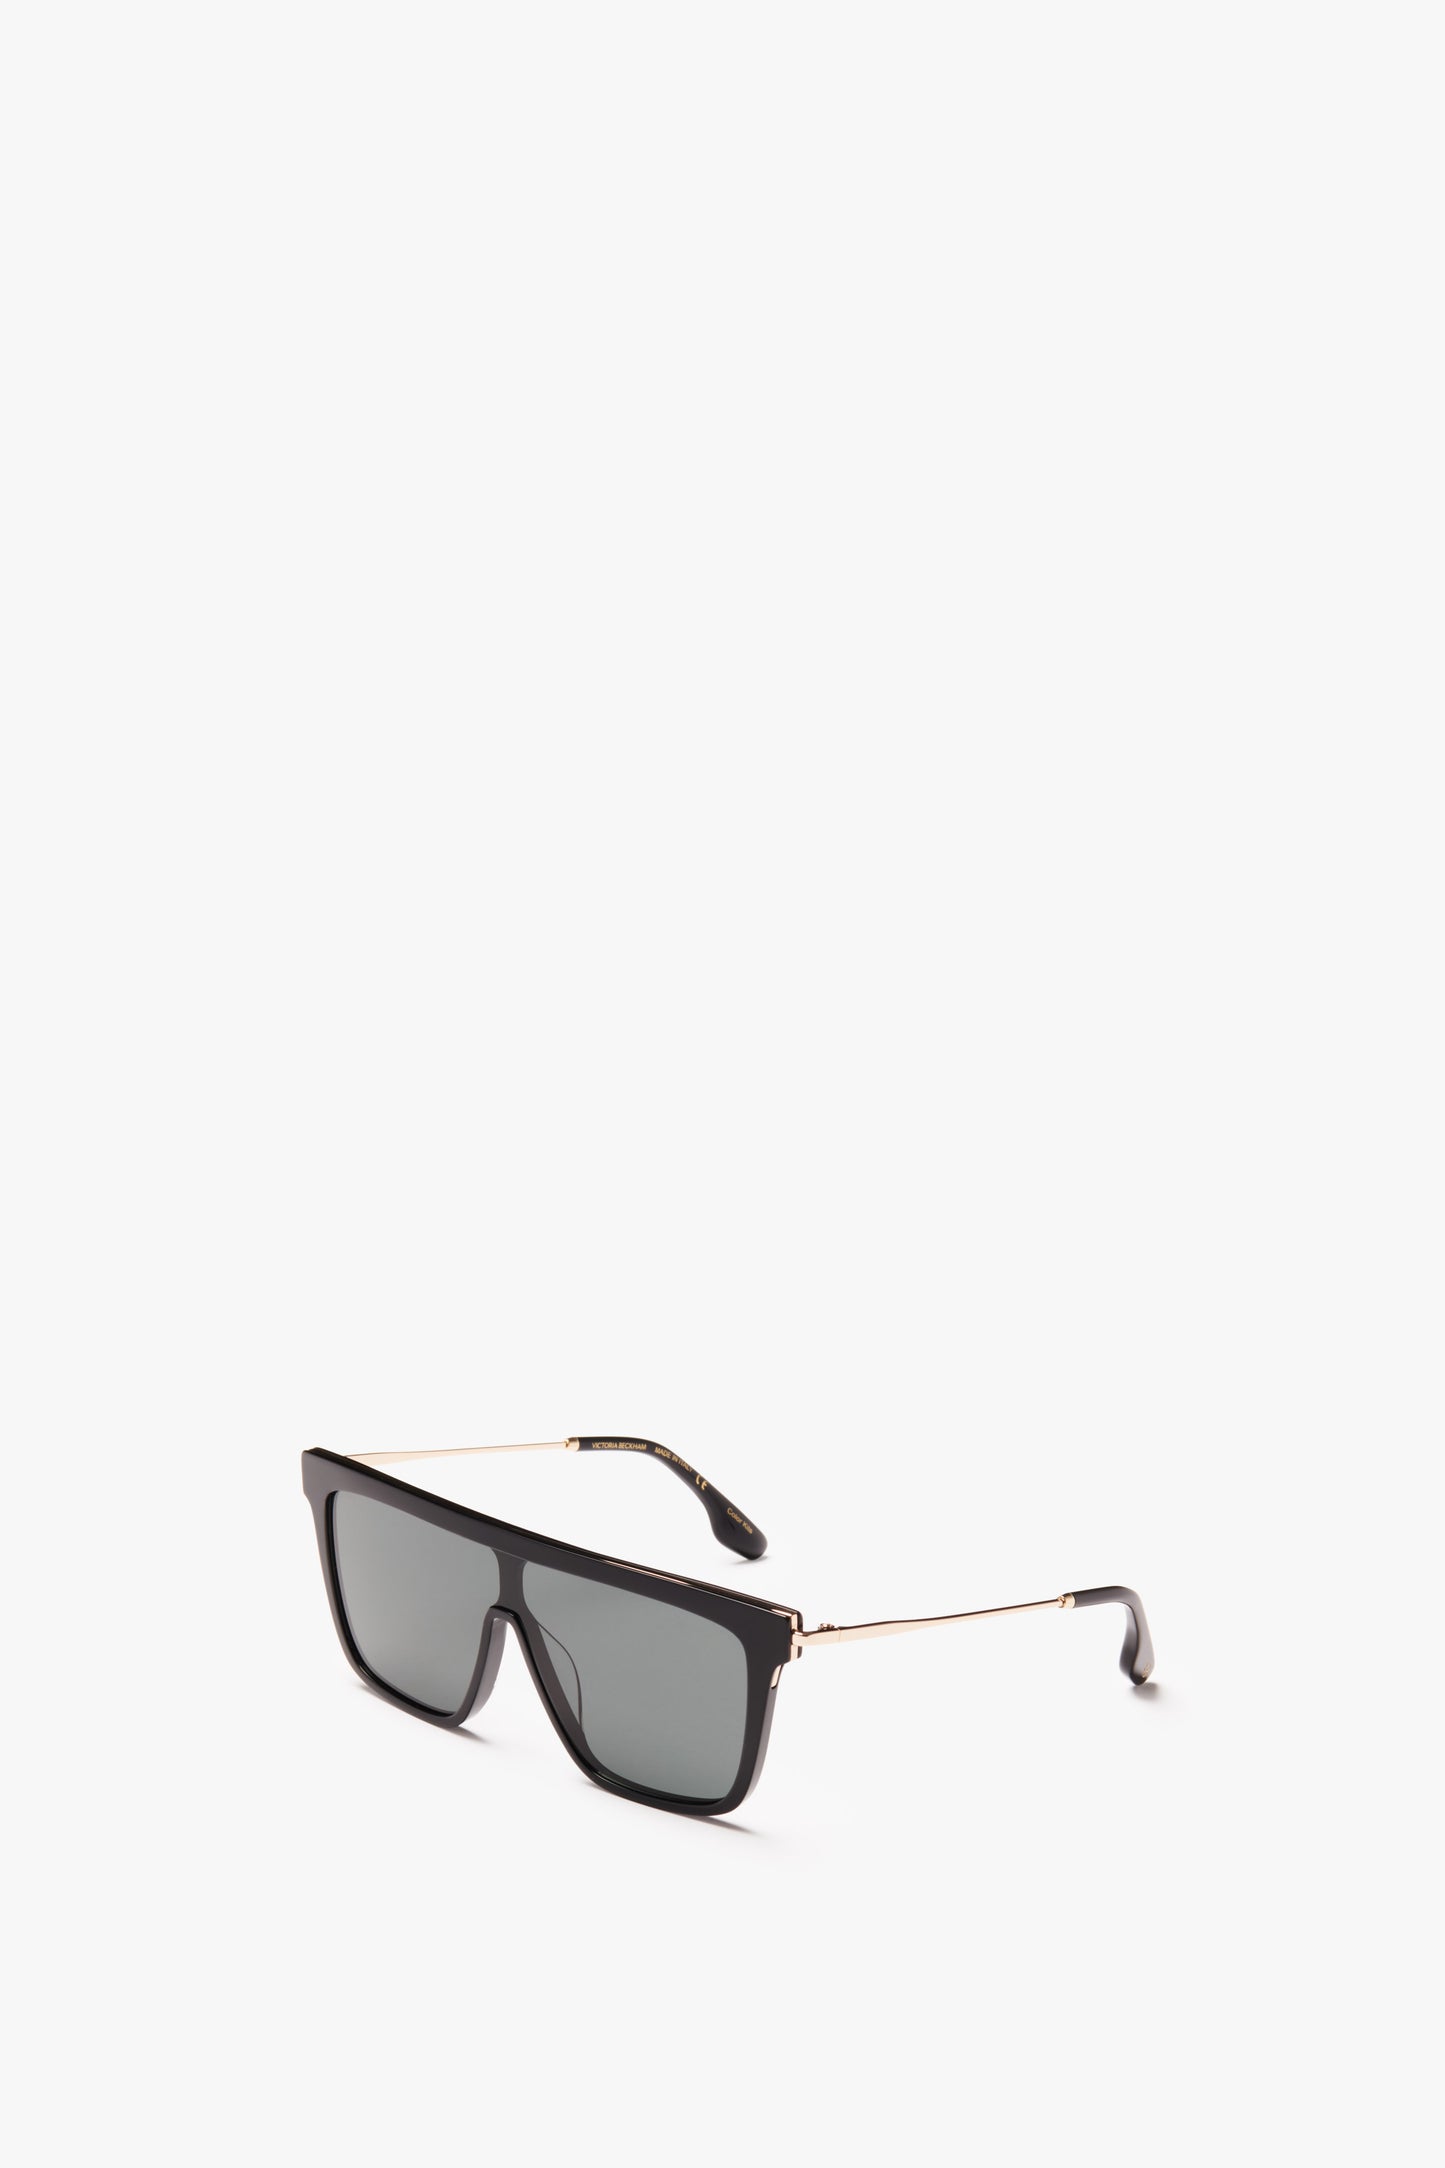 A pair of all-black Victoria Beckham Rectangular Shield Sunglasses with gold detailing on the arms, isolated on a white background.